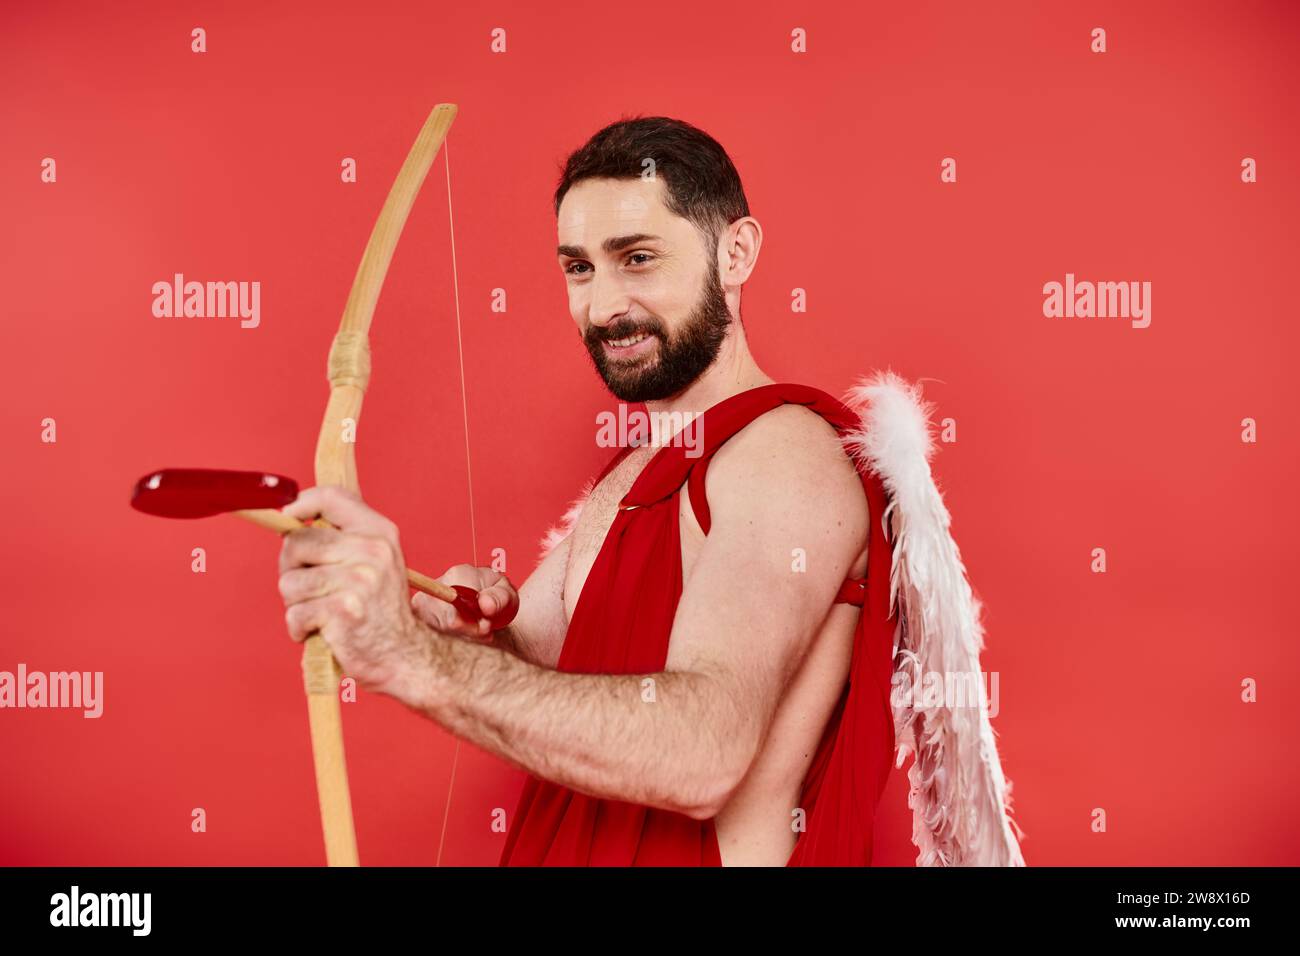 happy bearded man dressed as cupid archering with heart-shaped arrow on red, Saint Valentines day Stock Photo